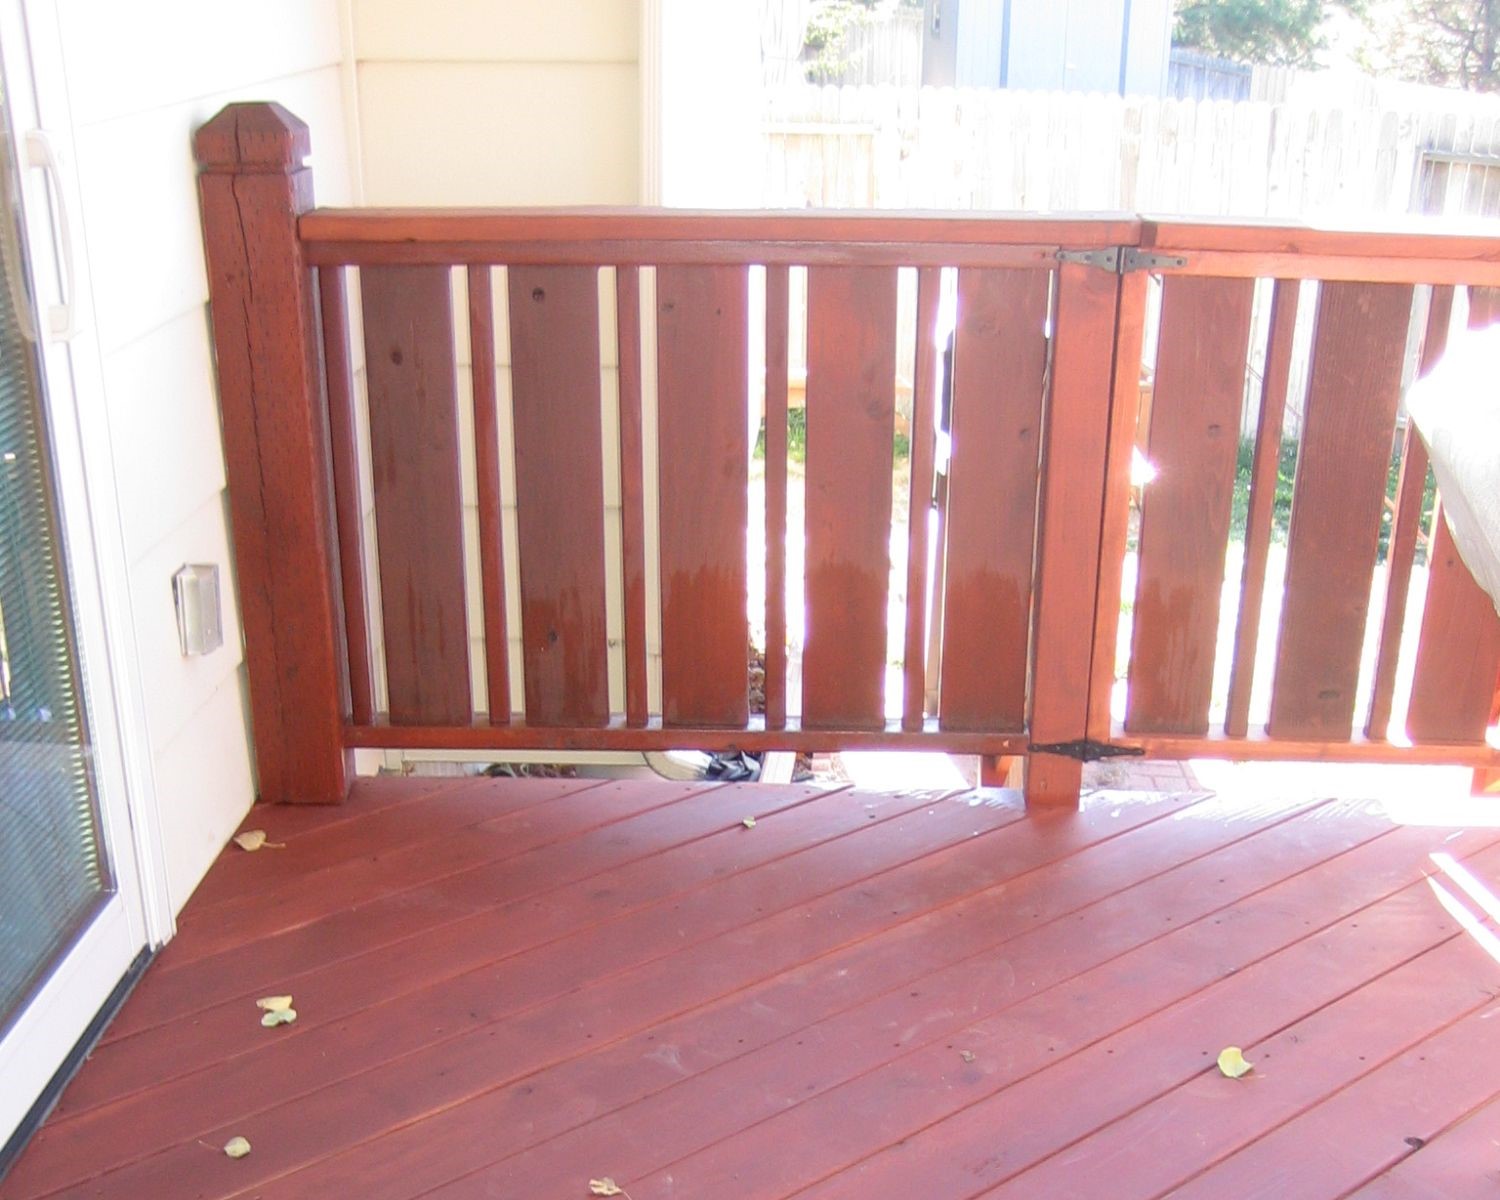 Redwood snow fence deck railing with a panel / baluster design and a matching gate for safety.